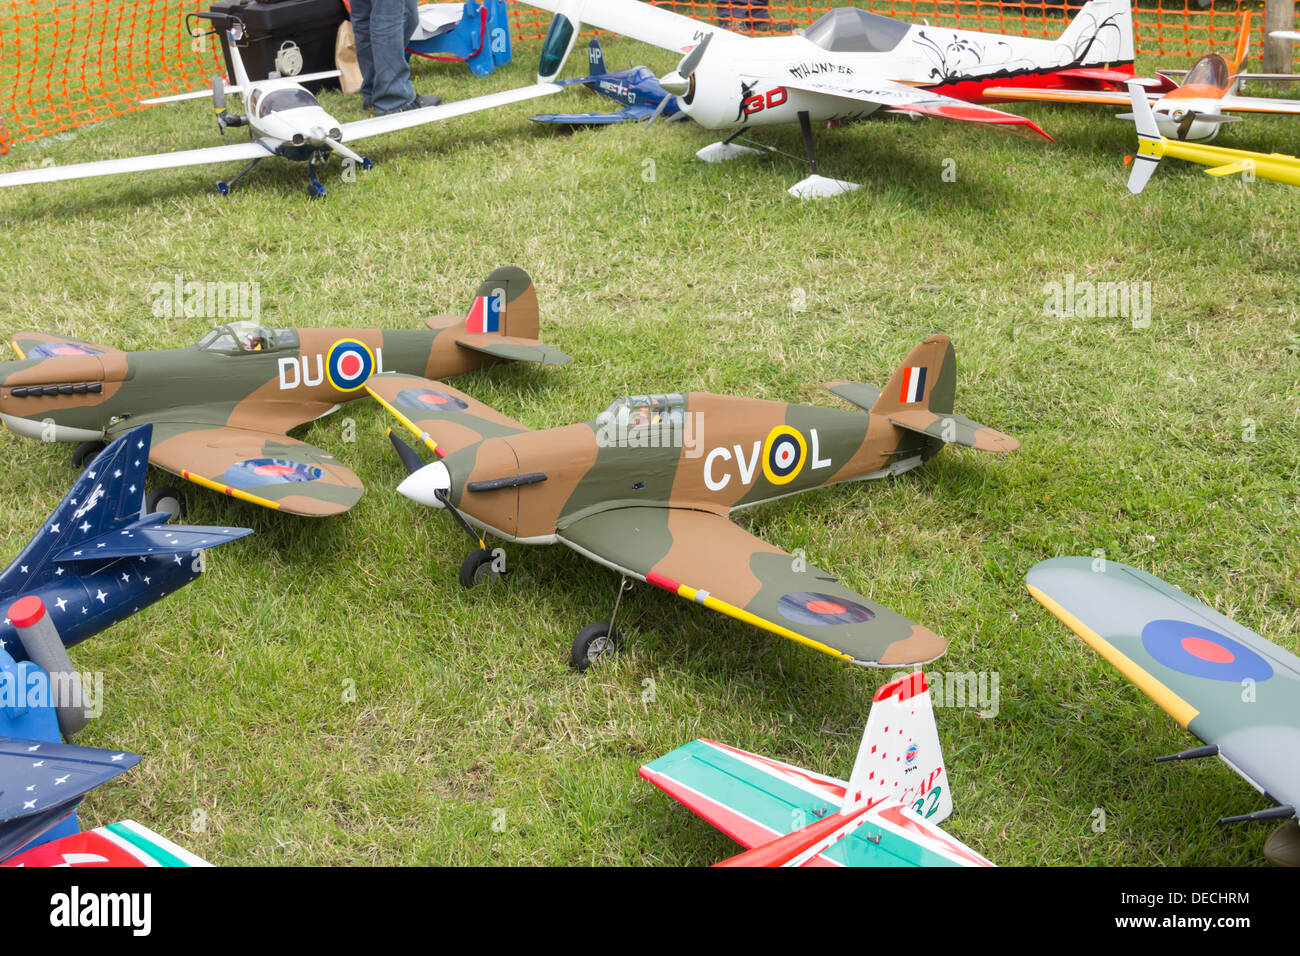 A static display of radio controlled scale model aeroplanes belonging to Bury Model Flying Club, Lancashire. Stock Photo